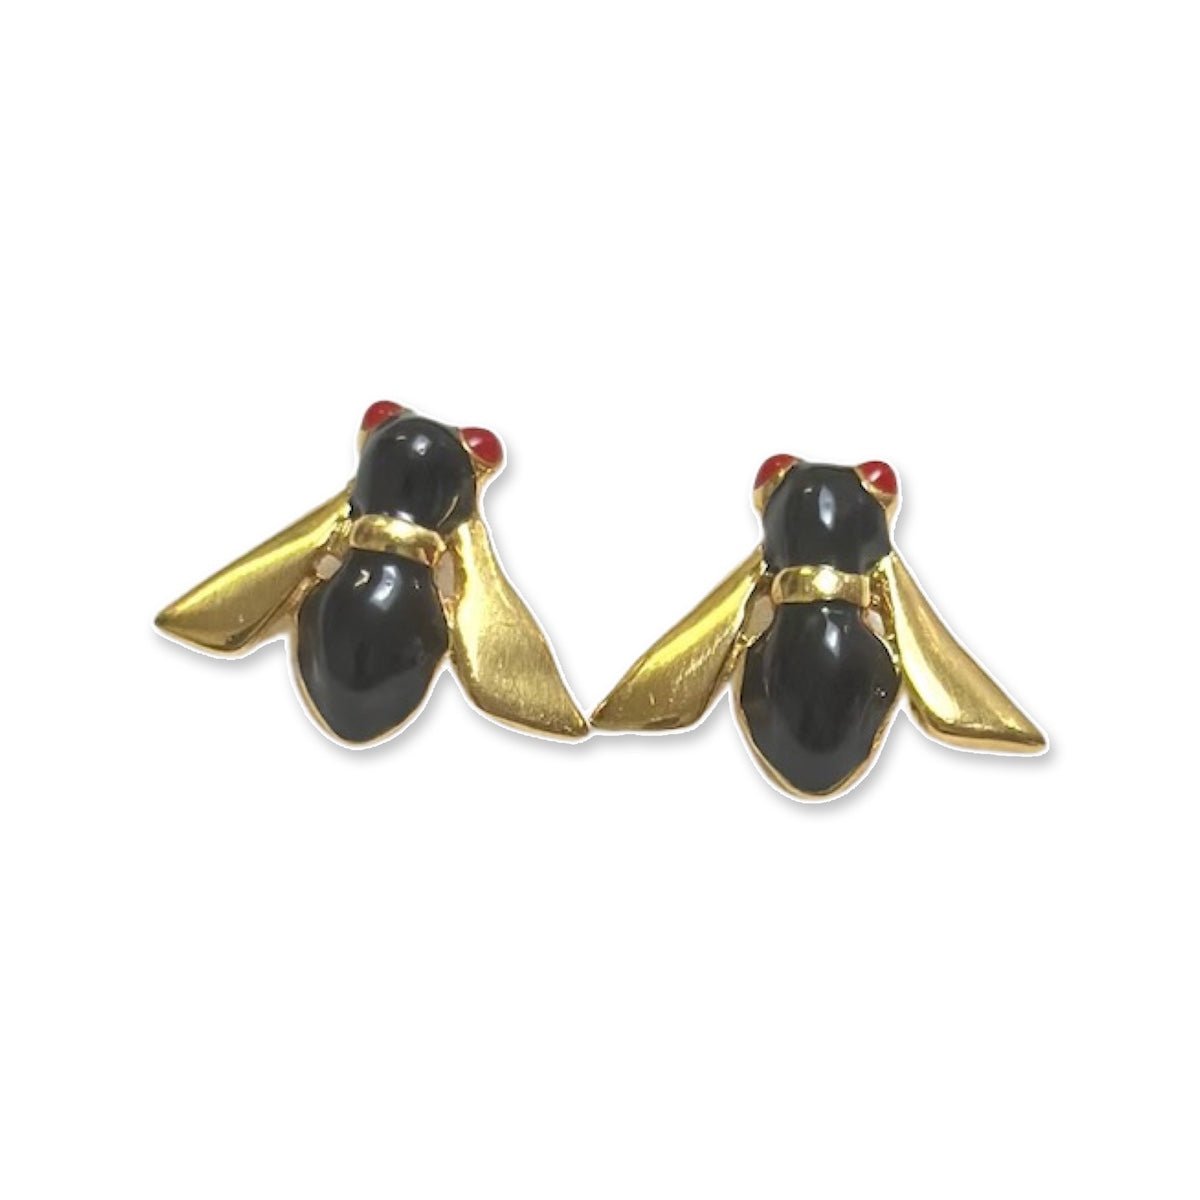 Black Bee Earrings on a white background